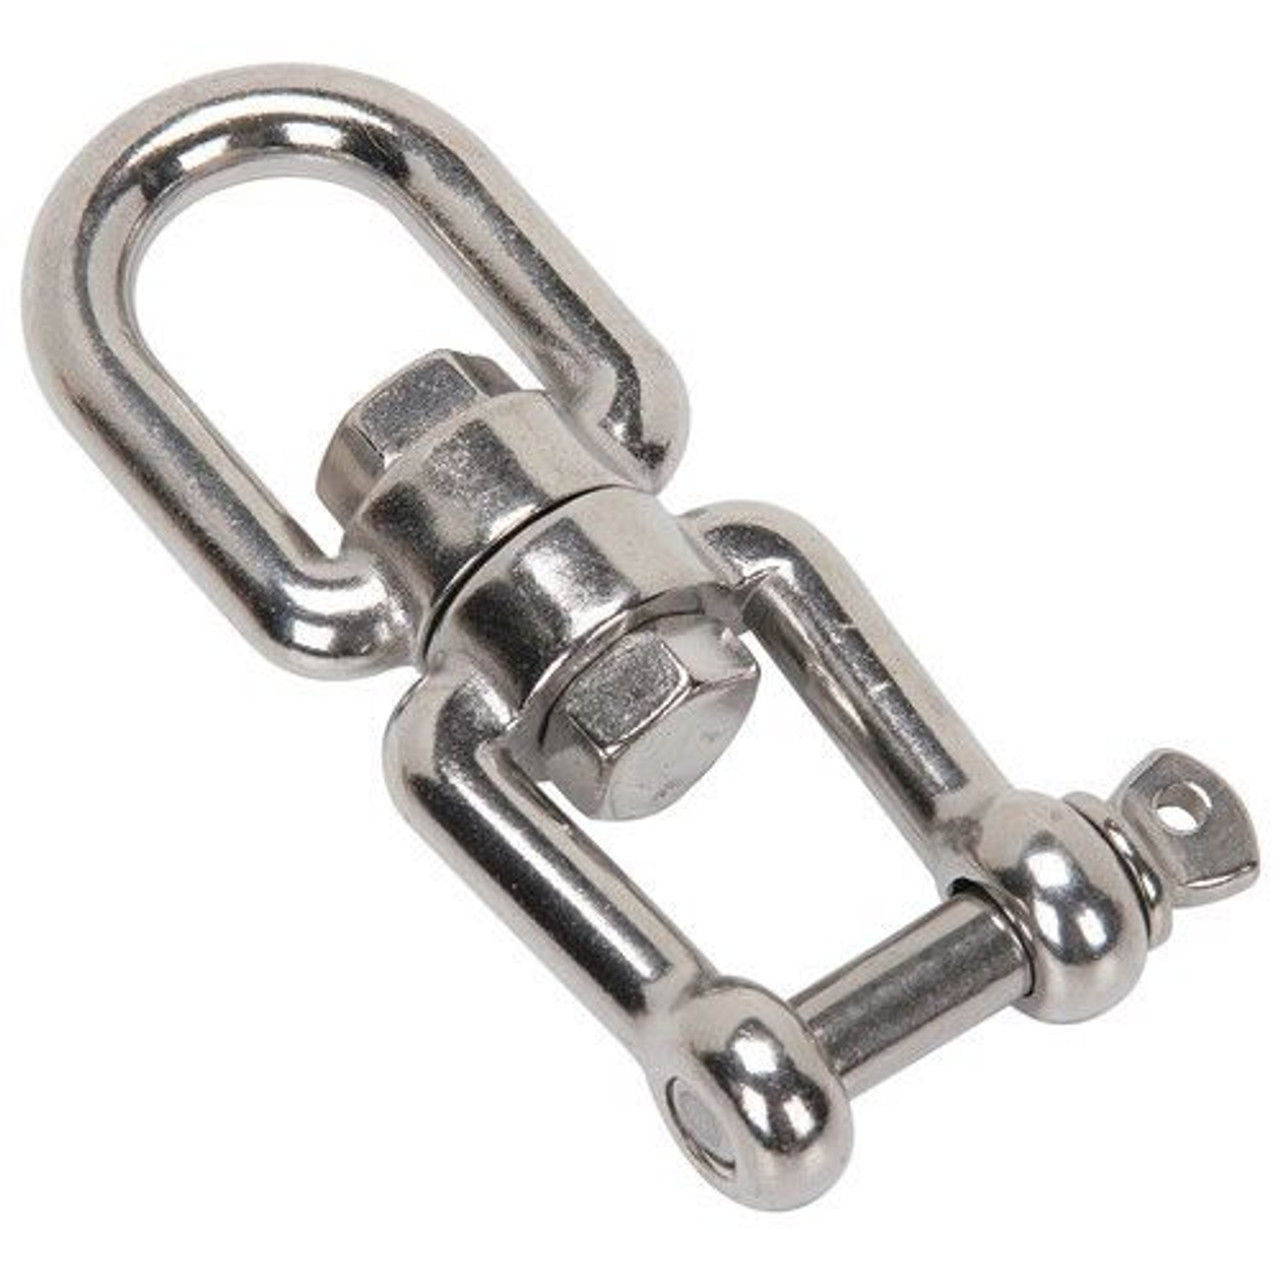 6mm-8mm A4-AISI 316 Stainless Steel Swivel Anchor Chain Connector SWL  1350Kg- 208.352.406